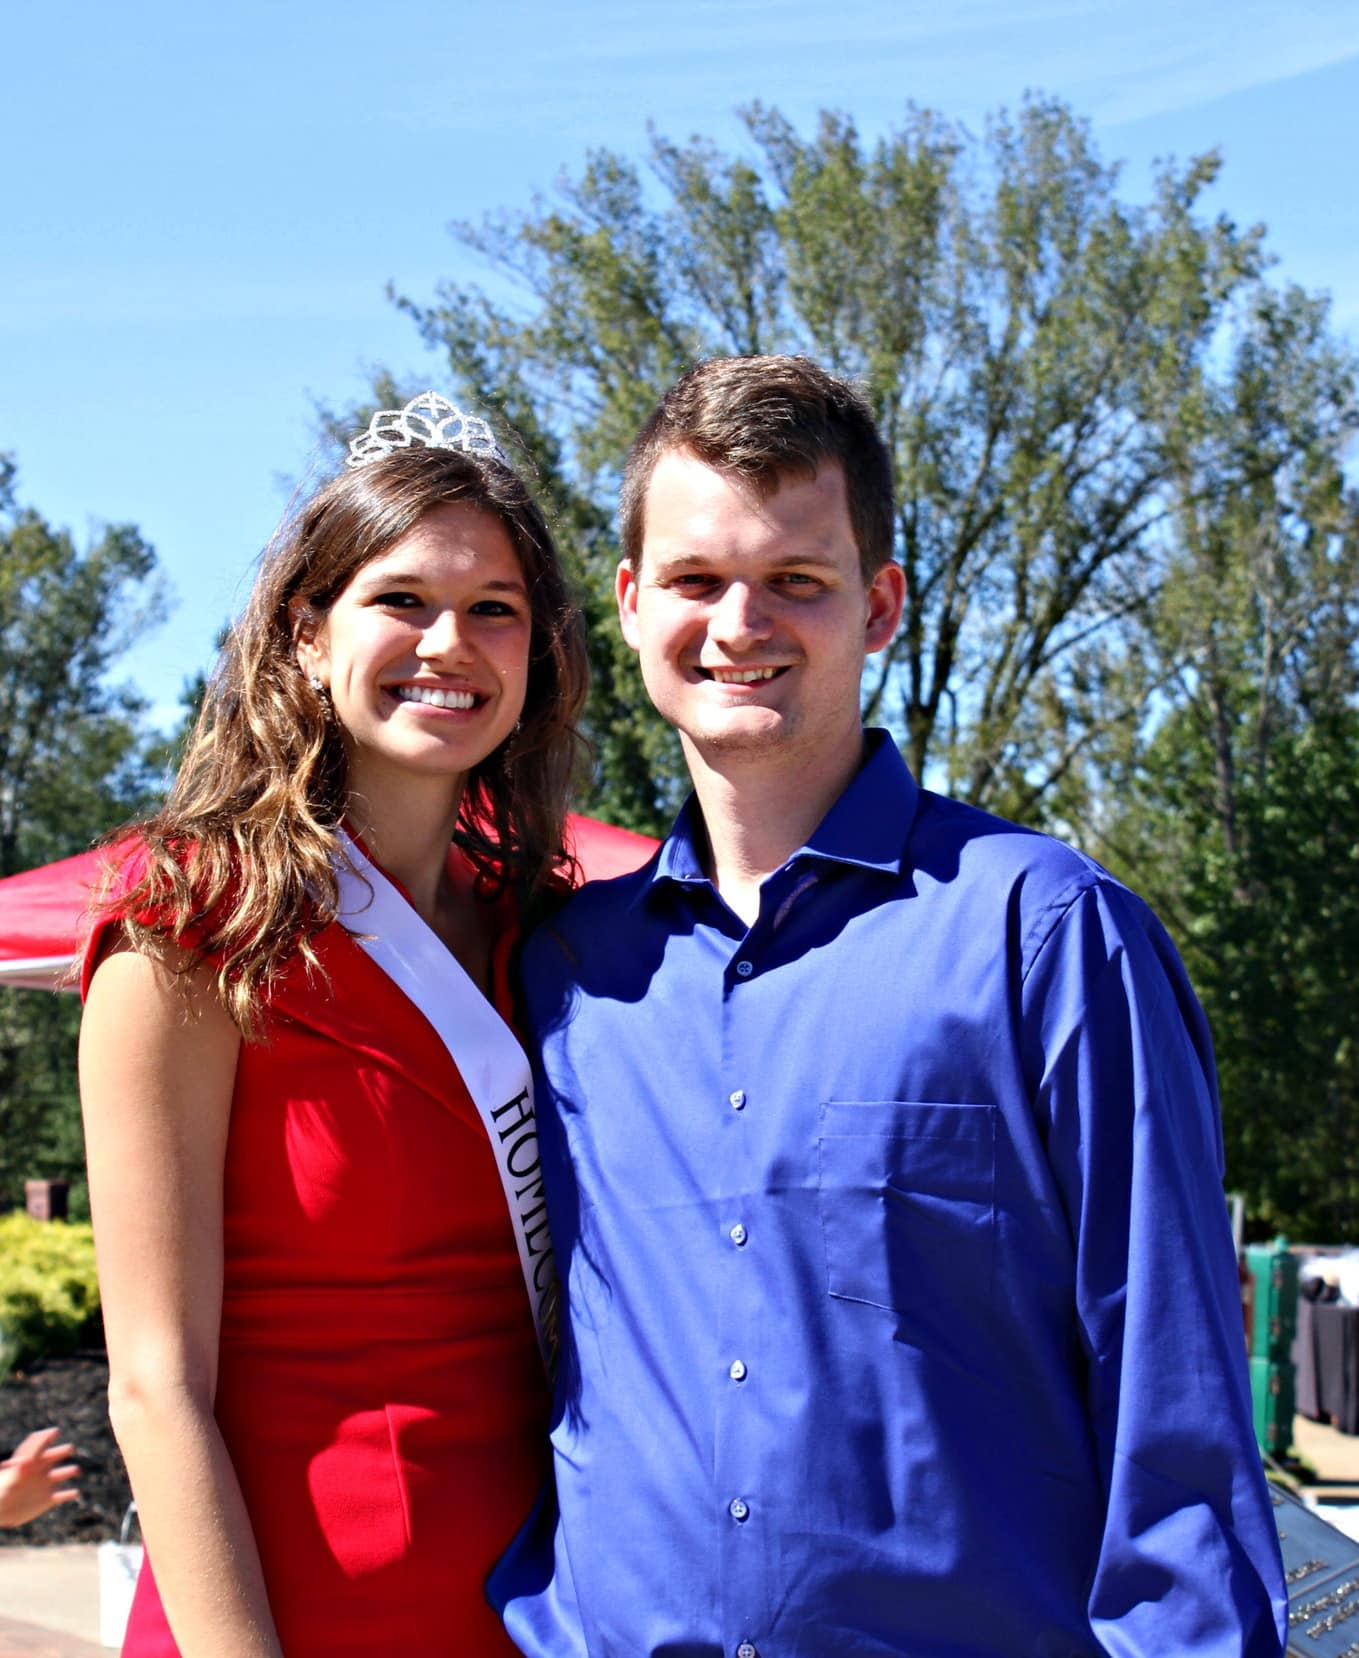 Former homecoming queen Eden Crain (senior), and her fianc are enjoying homecoming as her last day of being queen.